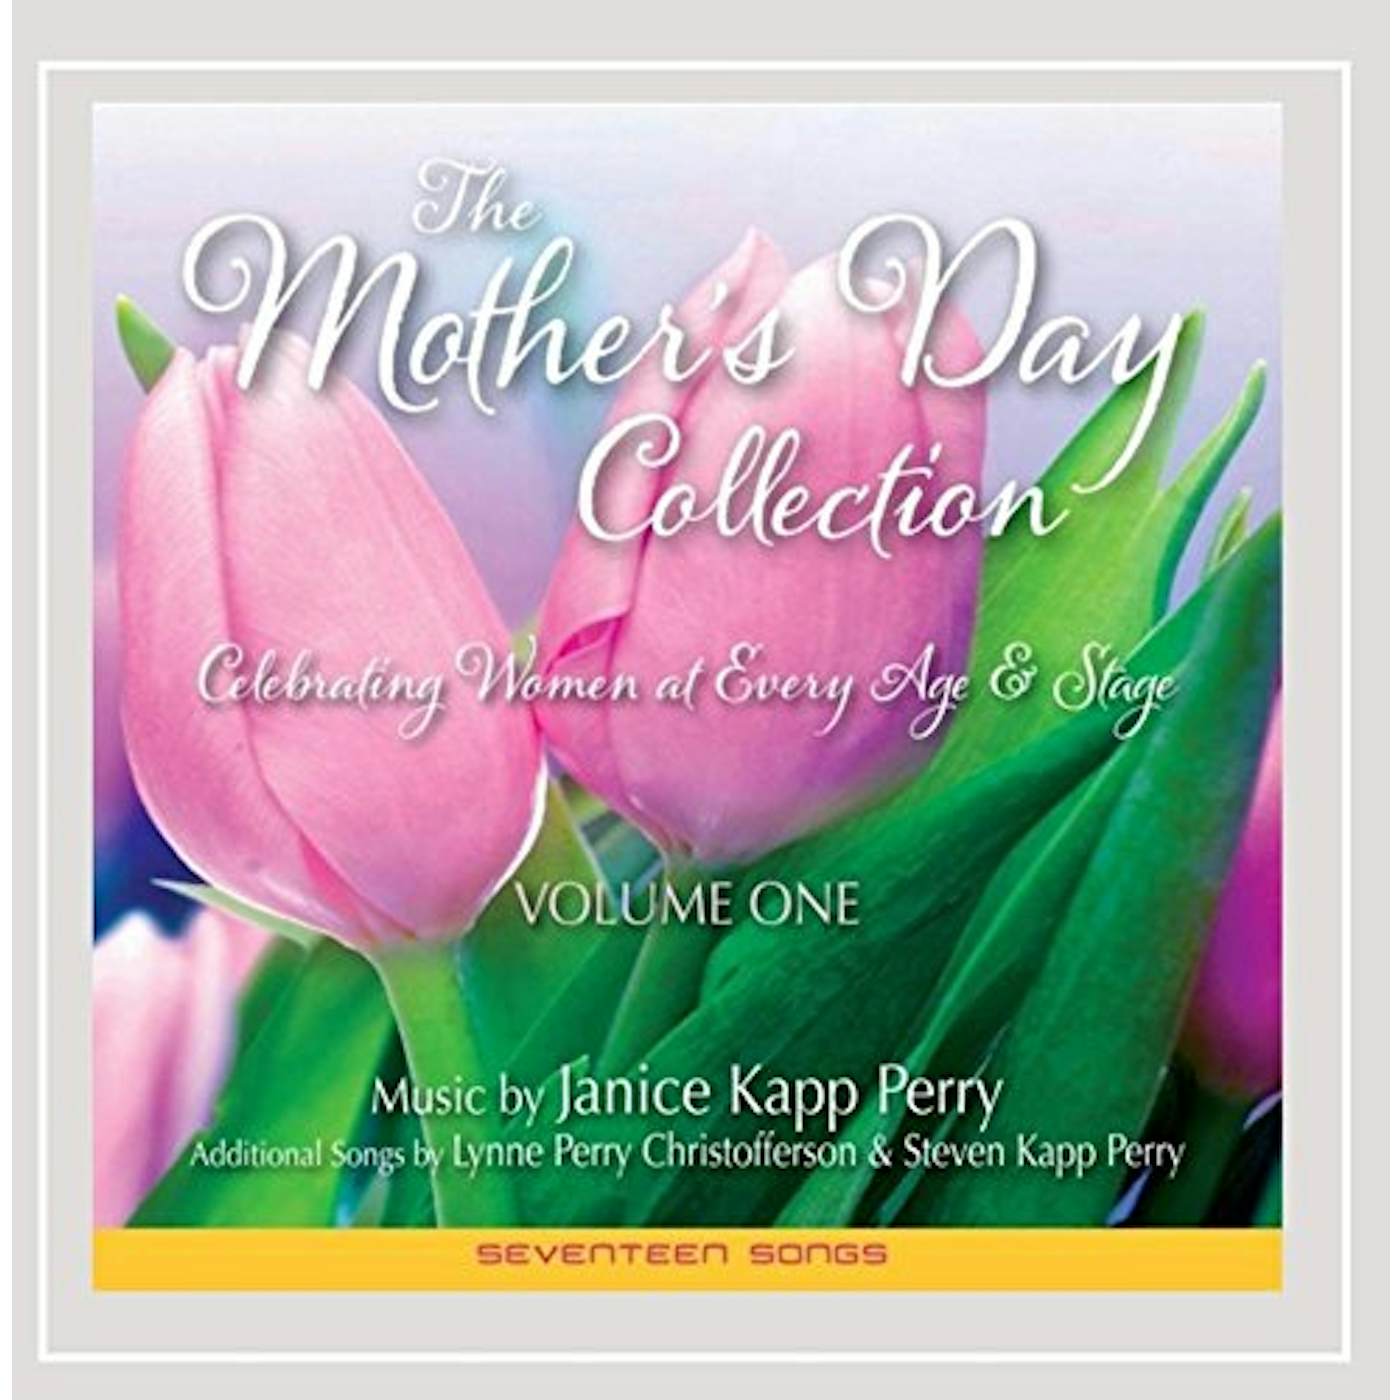 Janice Kapp Perry MOTHER'S DAY COLLECTION 1 CD